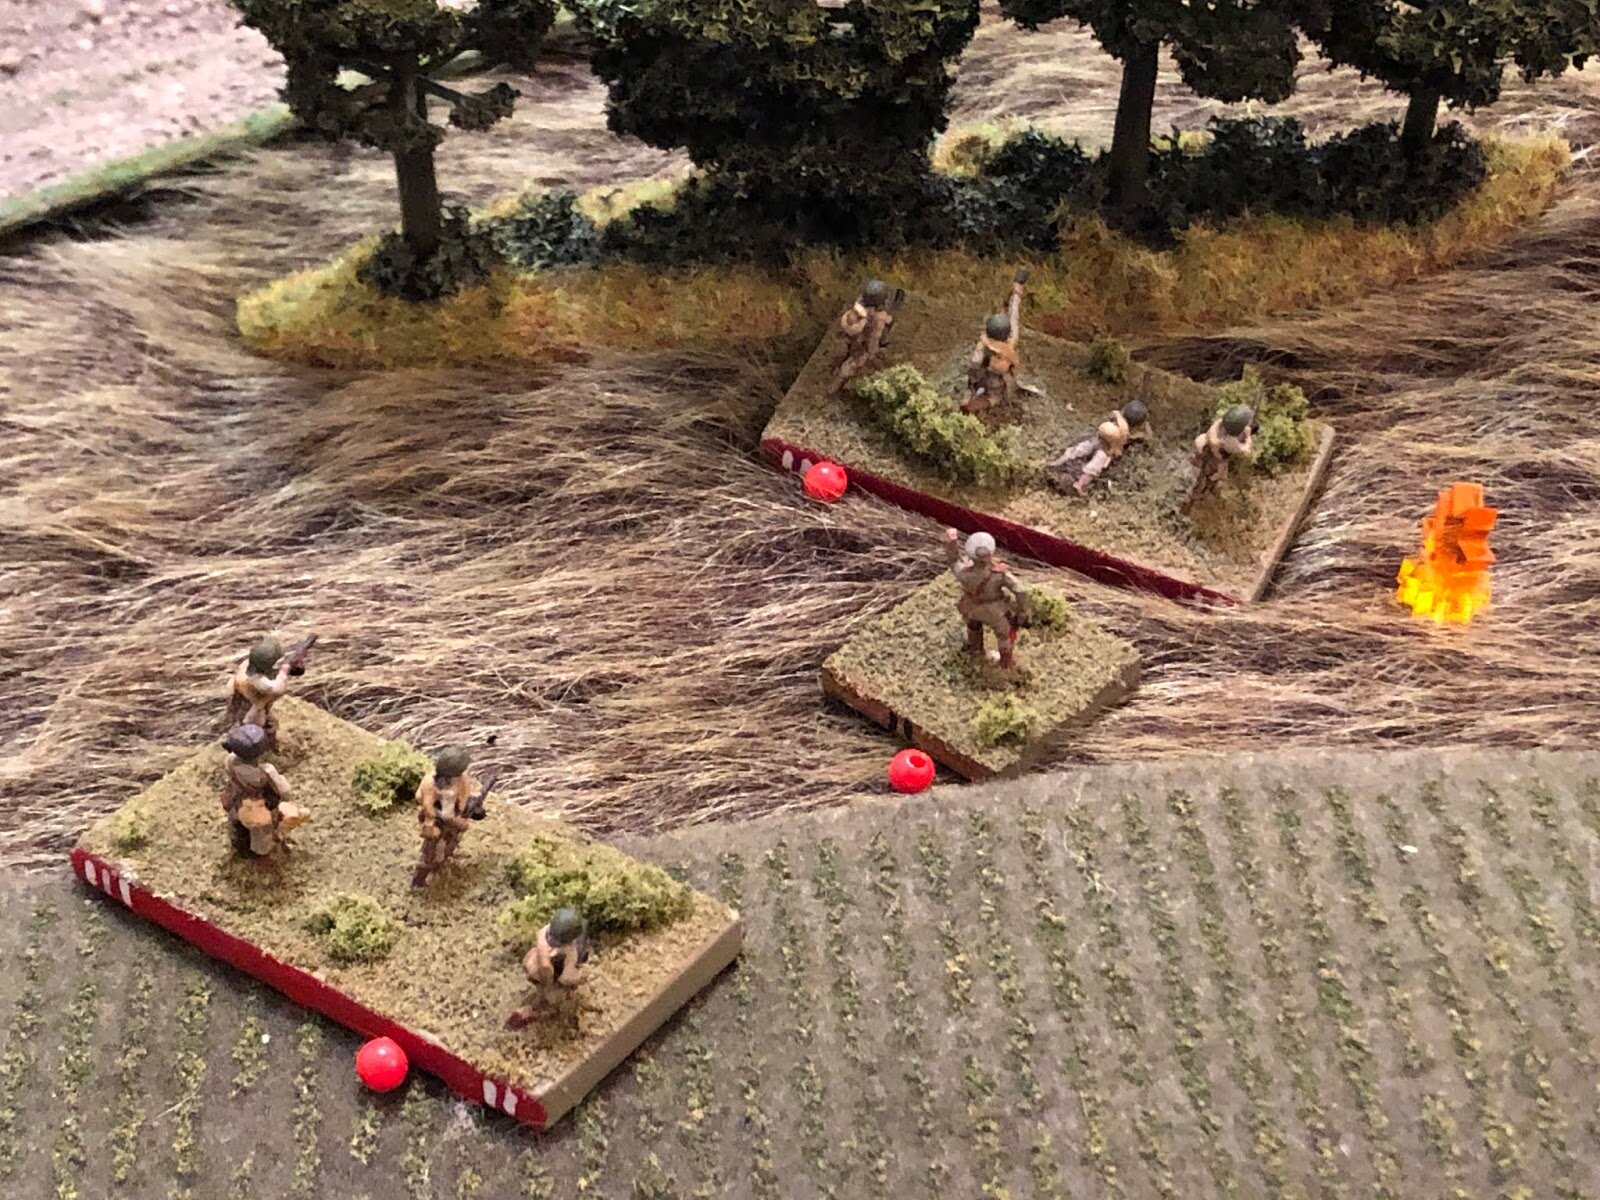  And the entire Soviet 2nd Rifle Platoon is suppressed! 